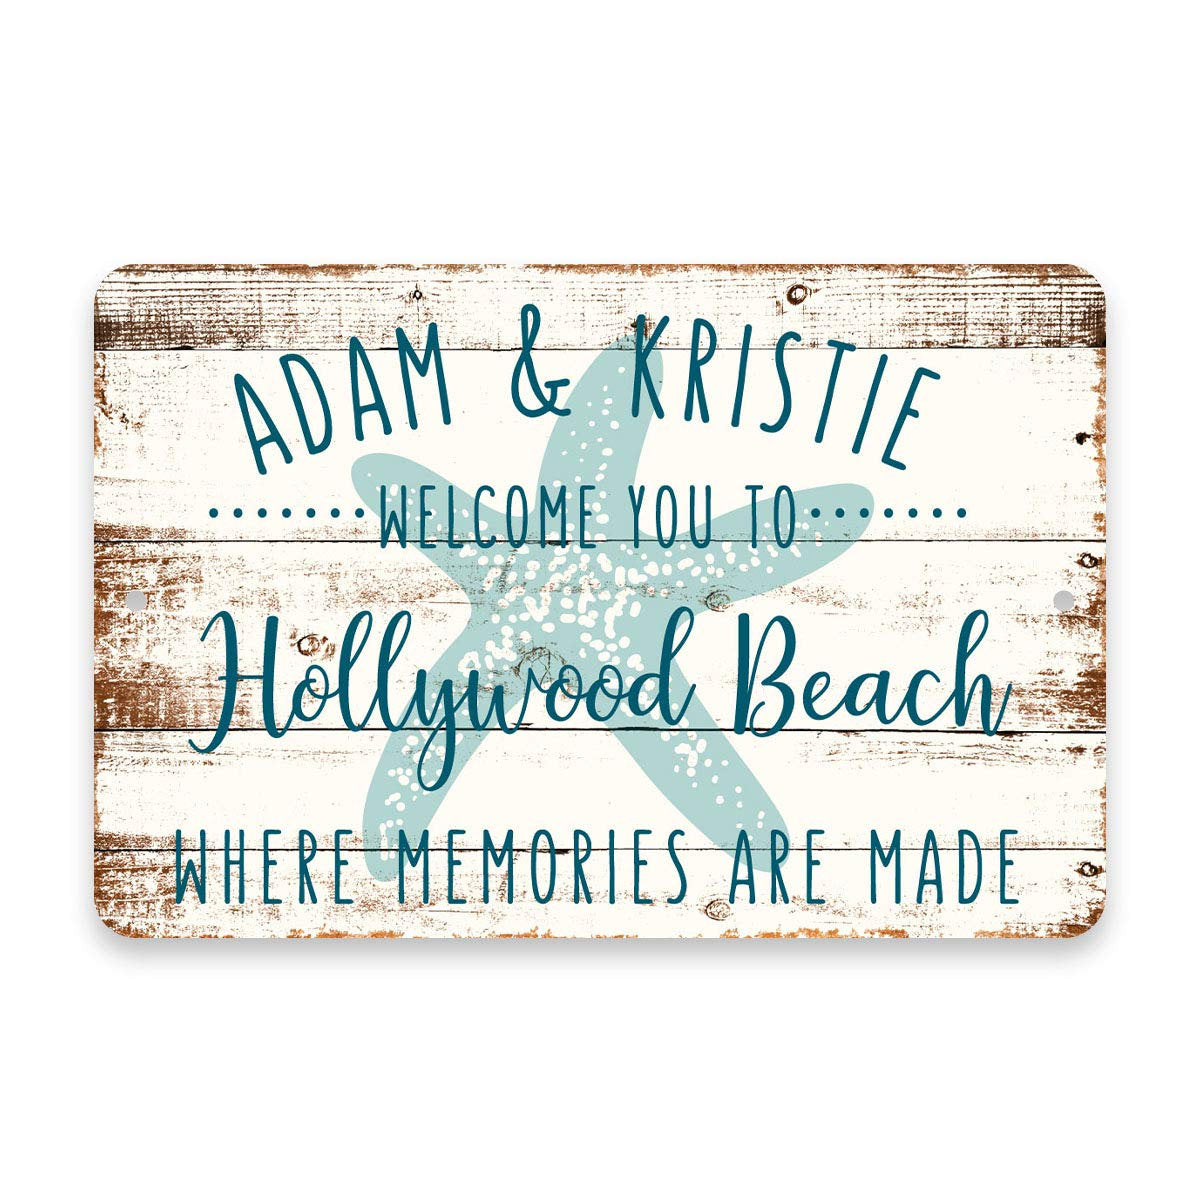 Personalized Welcome to Hollywood Beach Where Memories are Made Sign - 8 X 12 Metal Sign with Wood Look